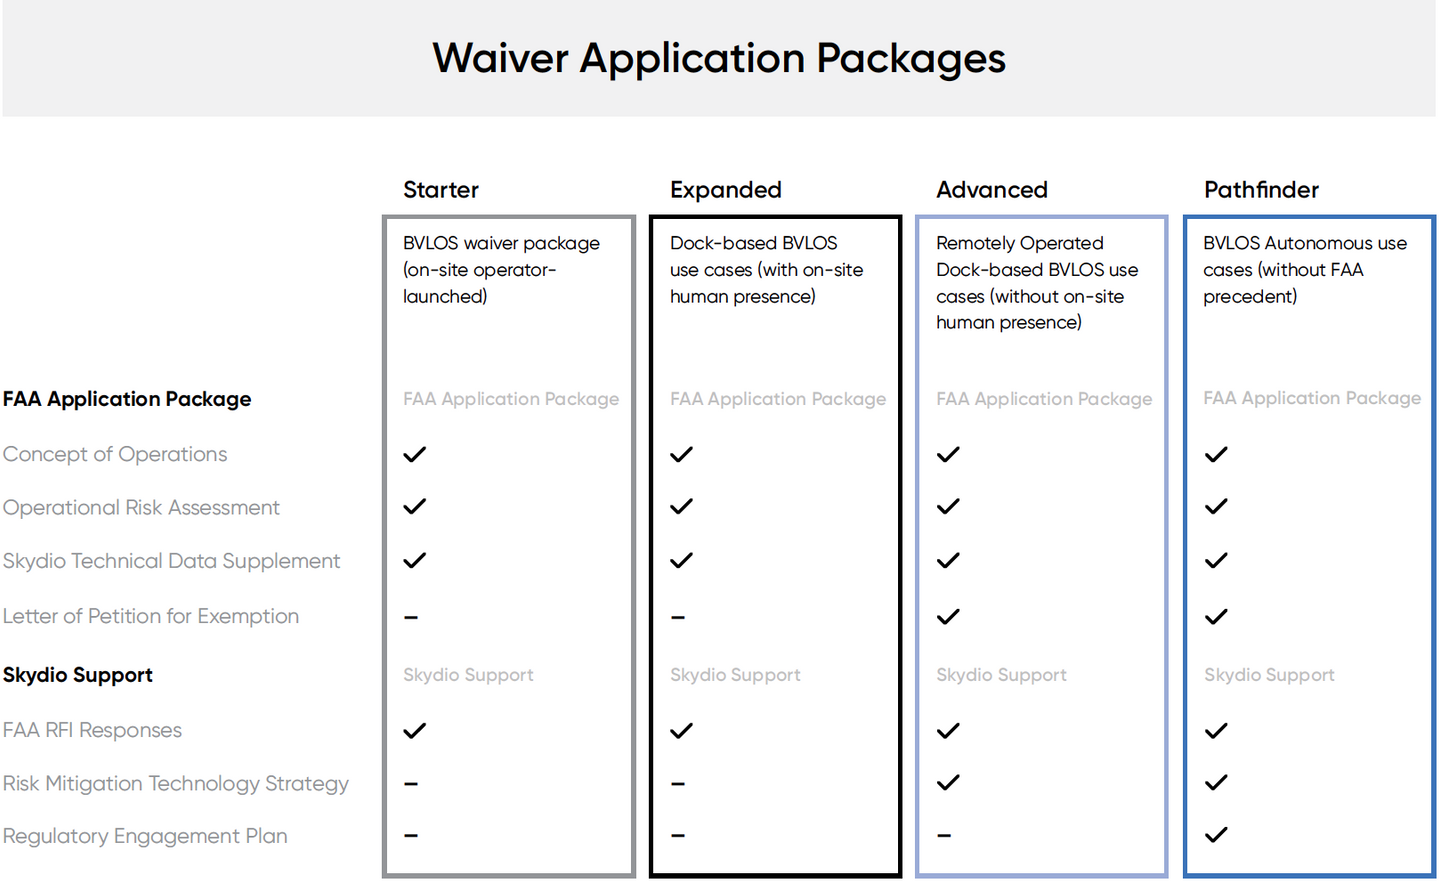 Skydio Regulatory Services for Waiver Applications